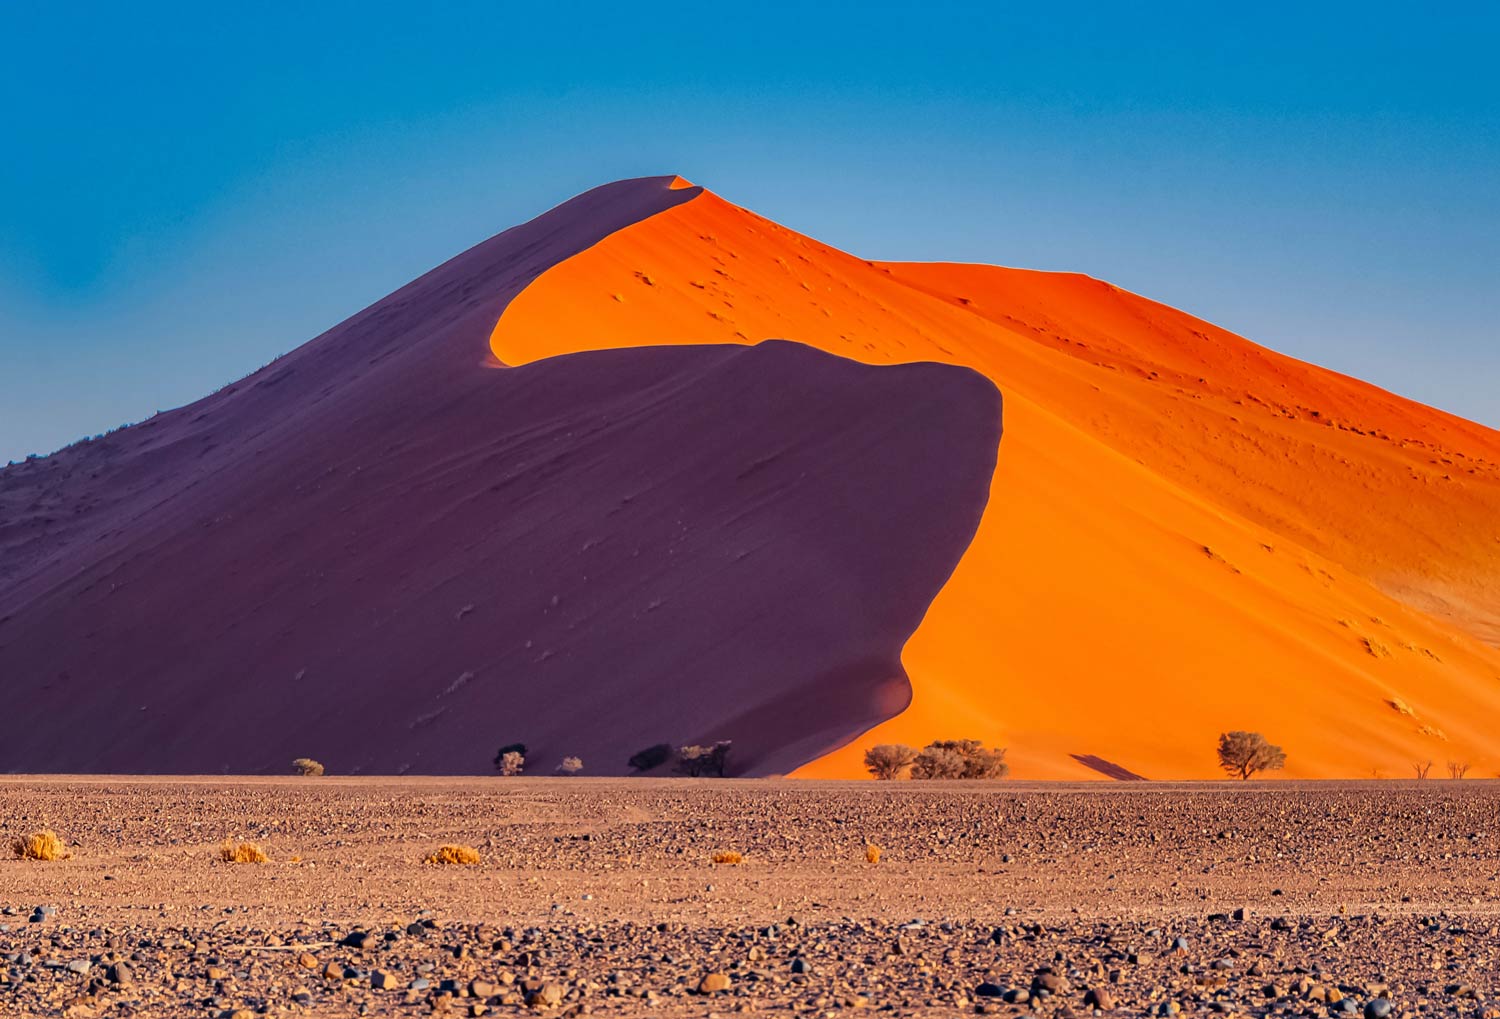 One oOne of the many beautiful dunes in the Namib desert, Sossusvlei, Namibiaf many beautiful dunes in the Namib desert, Sossusvlei, Namibia